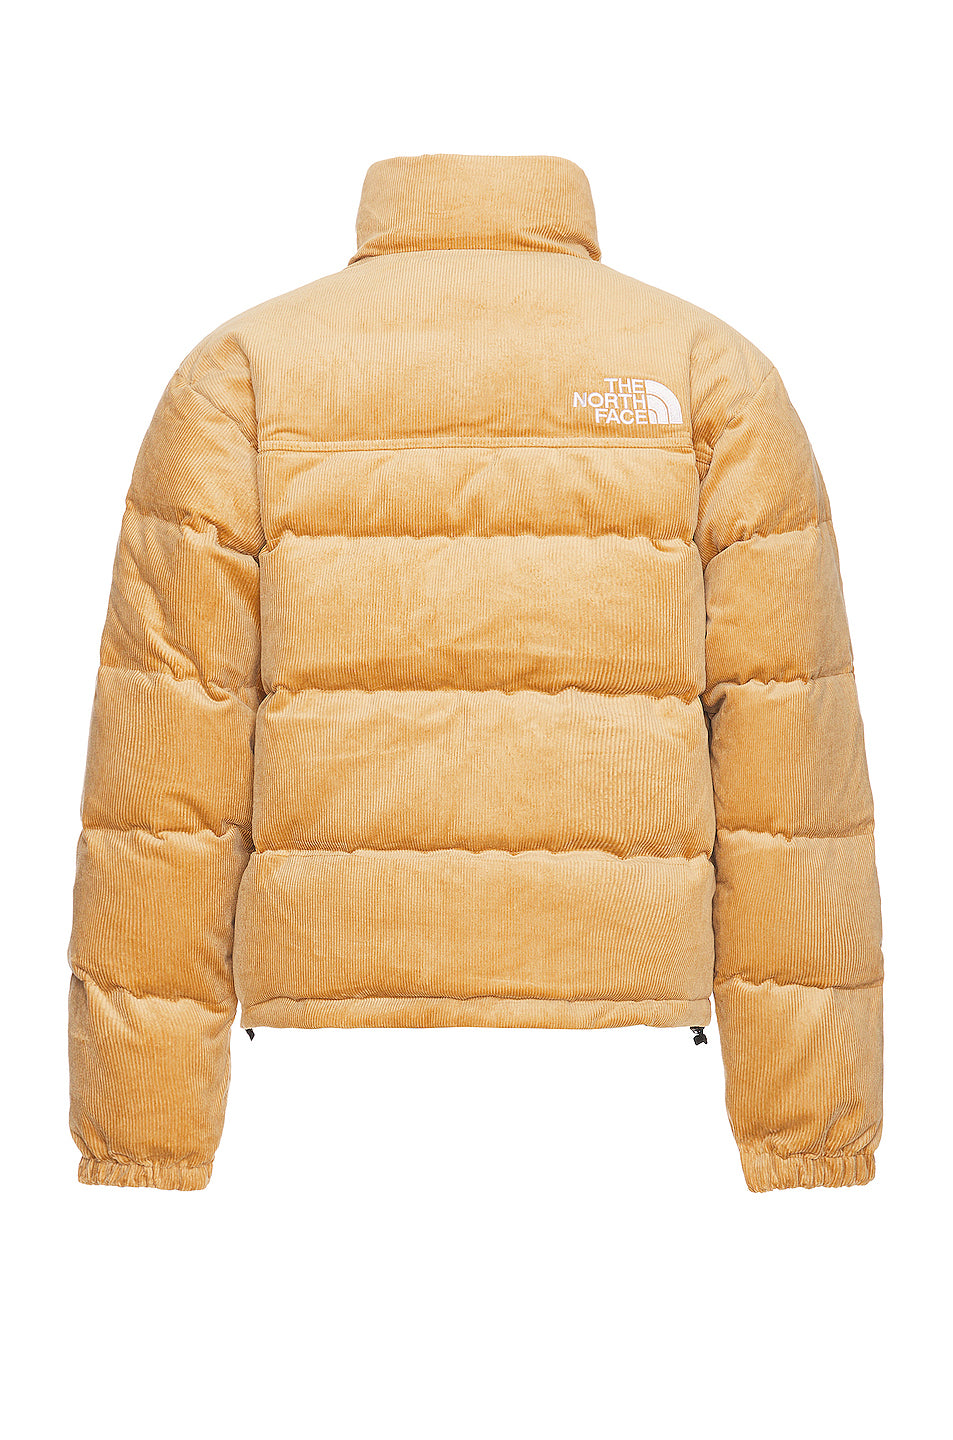 The North Face '92 Reversible Nuptse Puffer Jacket